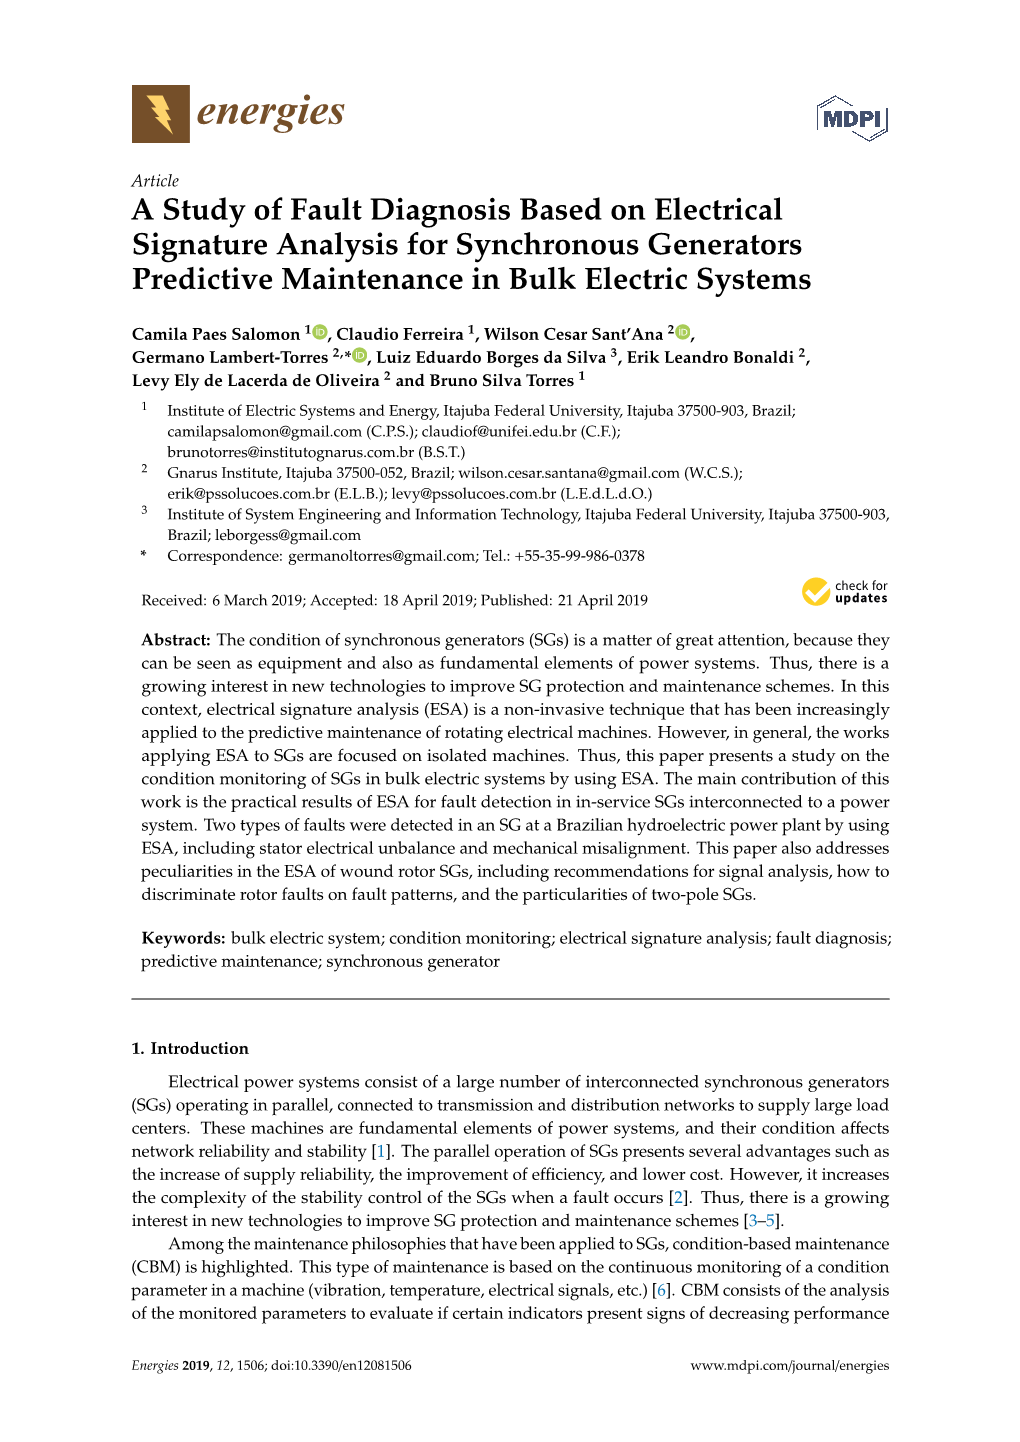 A Study of Fault Diagnosis Based on Electrical Signature Analysis for Synchronous Generators Predictive Maintenance in Bulk Electric Systems